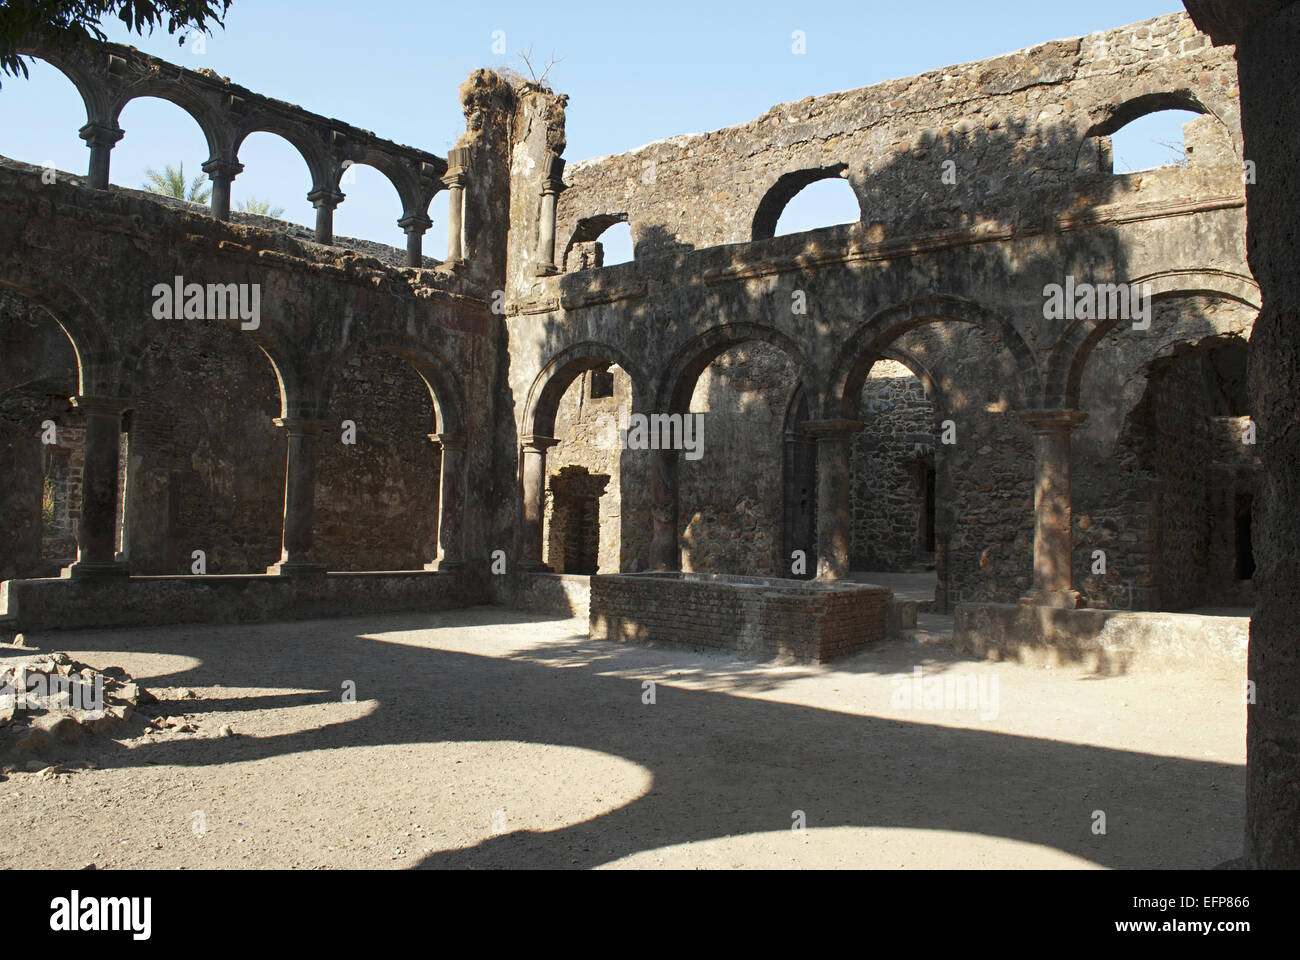 Vasai or Bassein Fort, Beautiful ancient ruined arched structure in the Fort complex. Mumbai, Maharashtra India Stock Photo